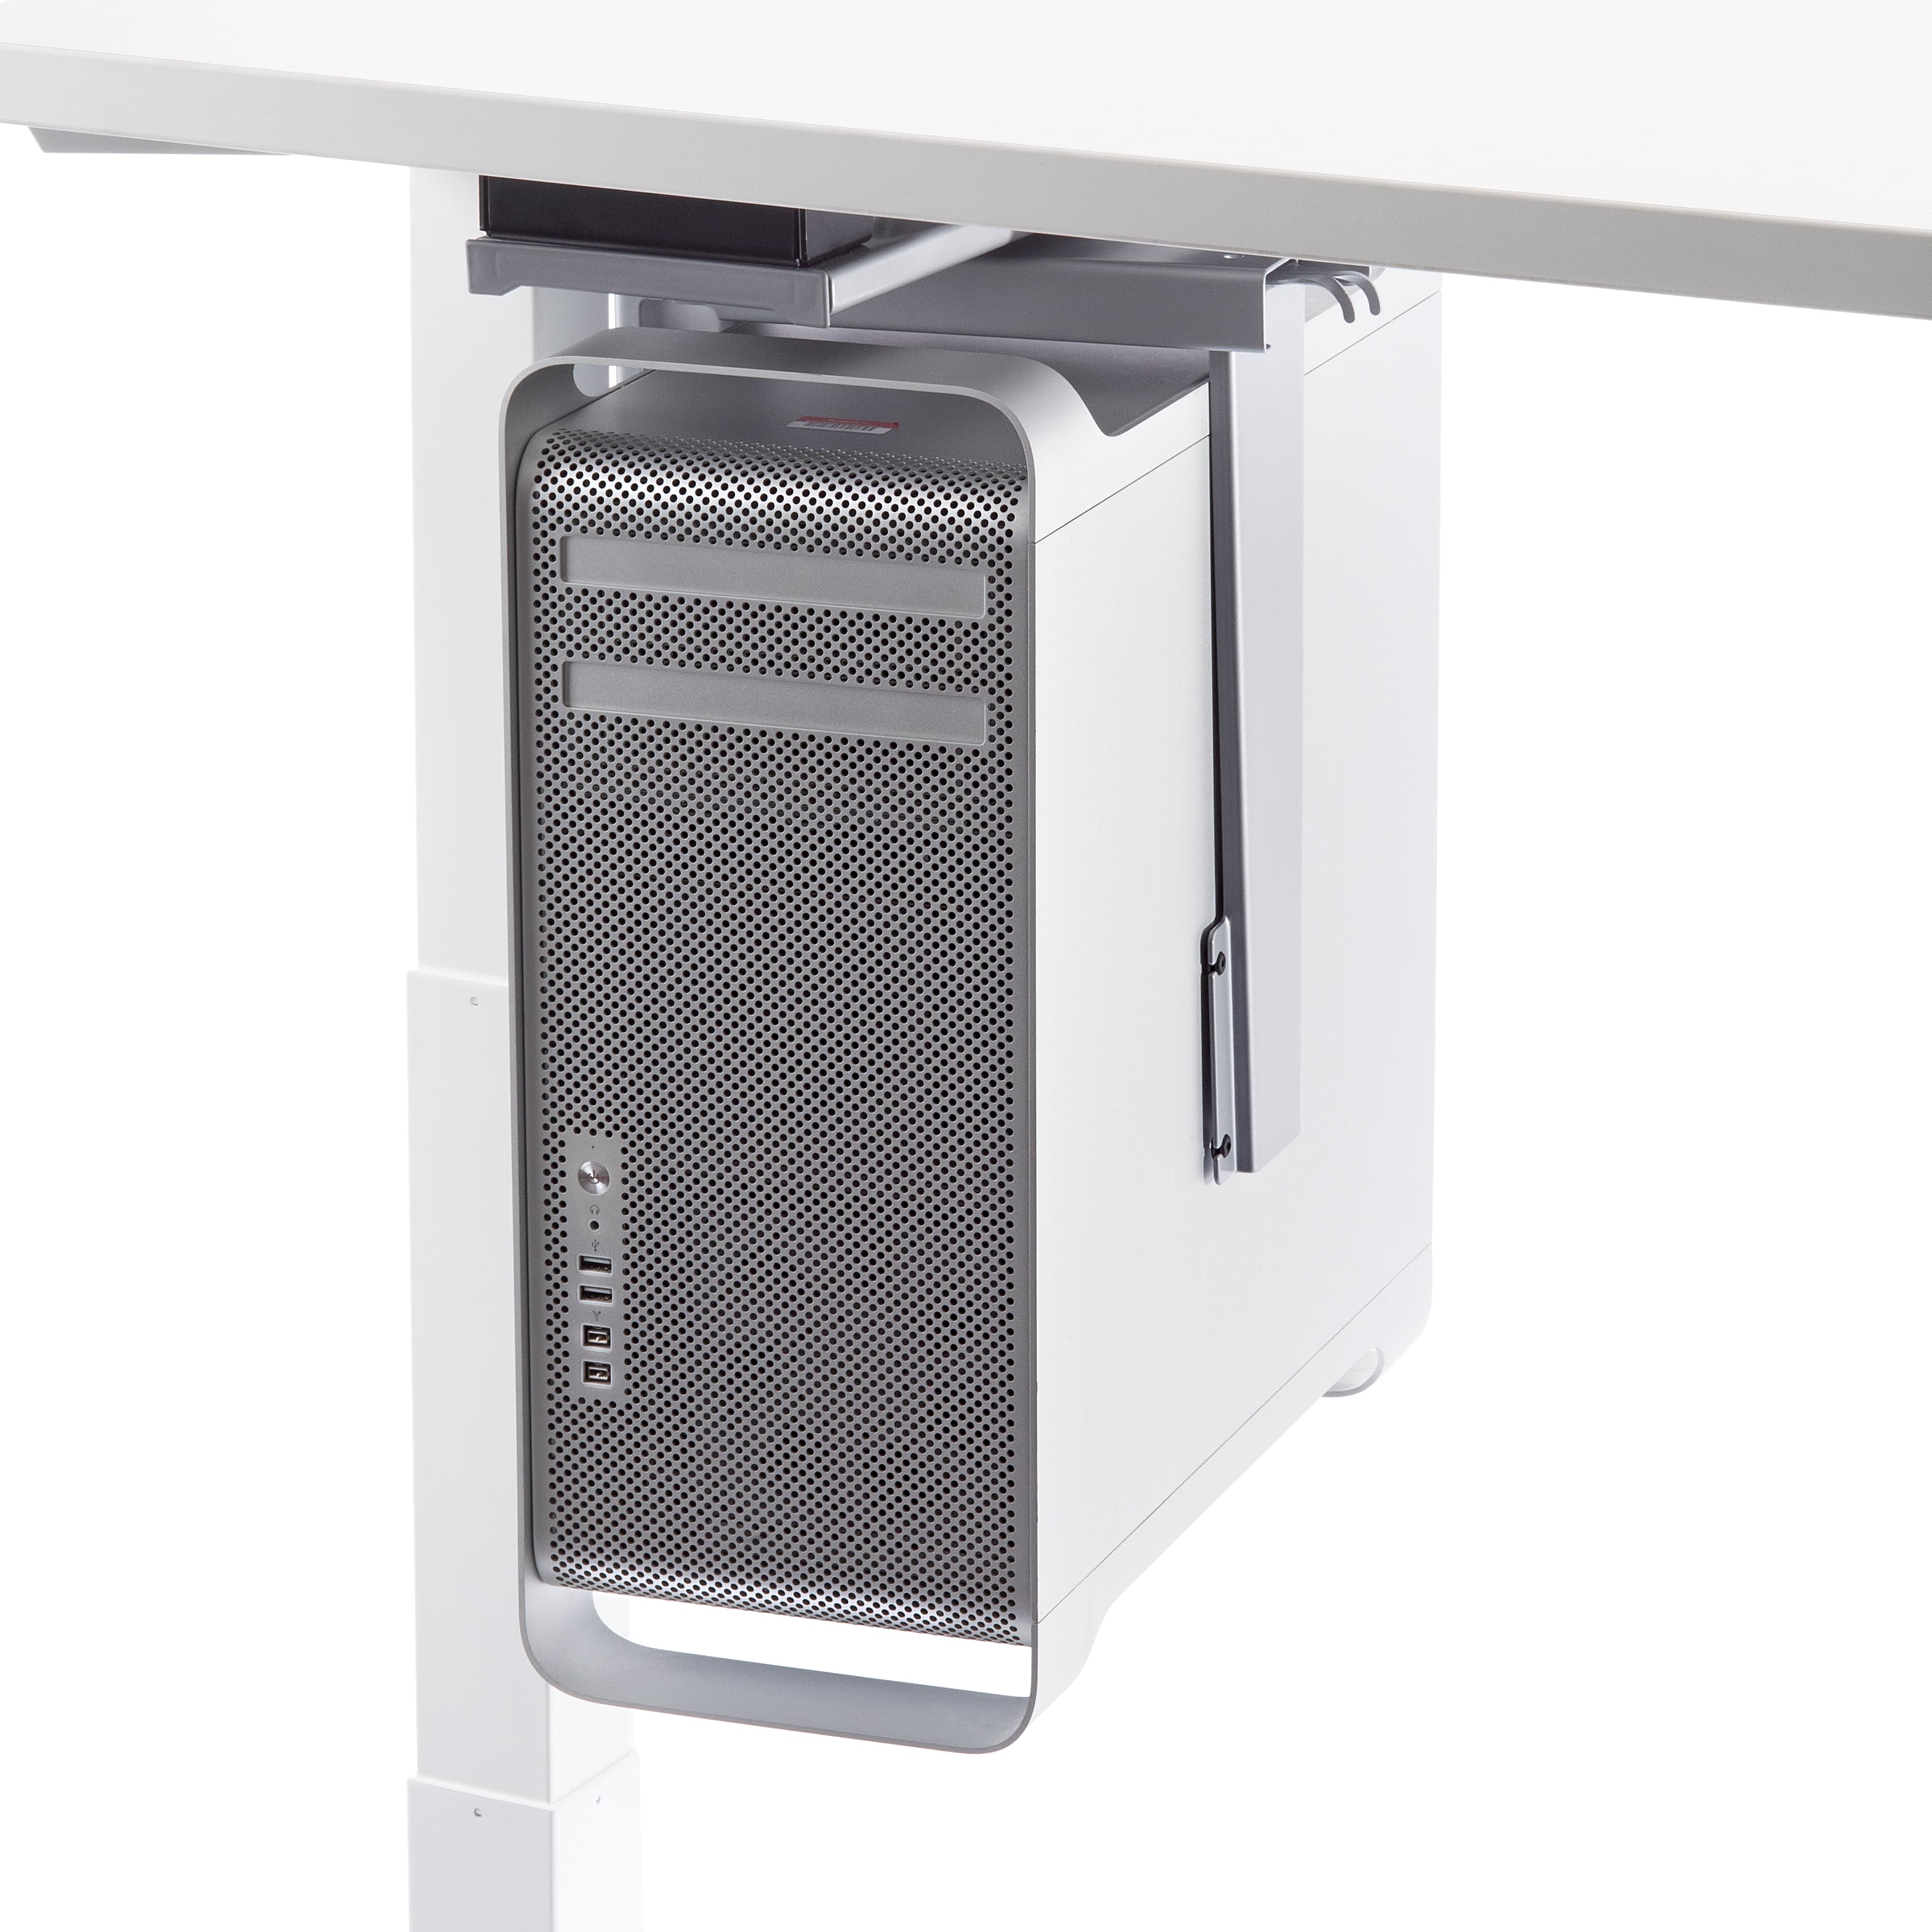 SitOnIt Seating, Accessories, The band CPU holder is a streamlined and adjustable device with an innovative strap-support